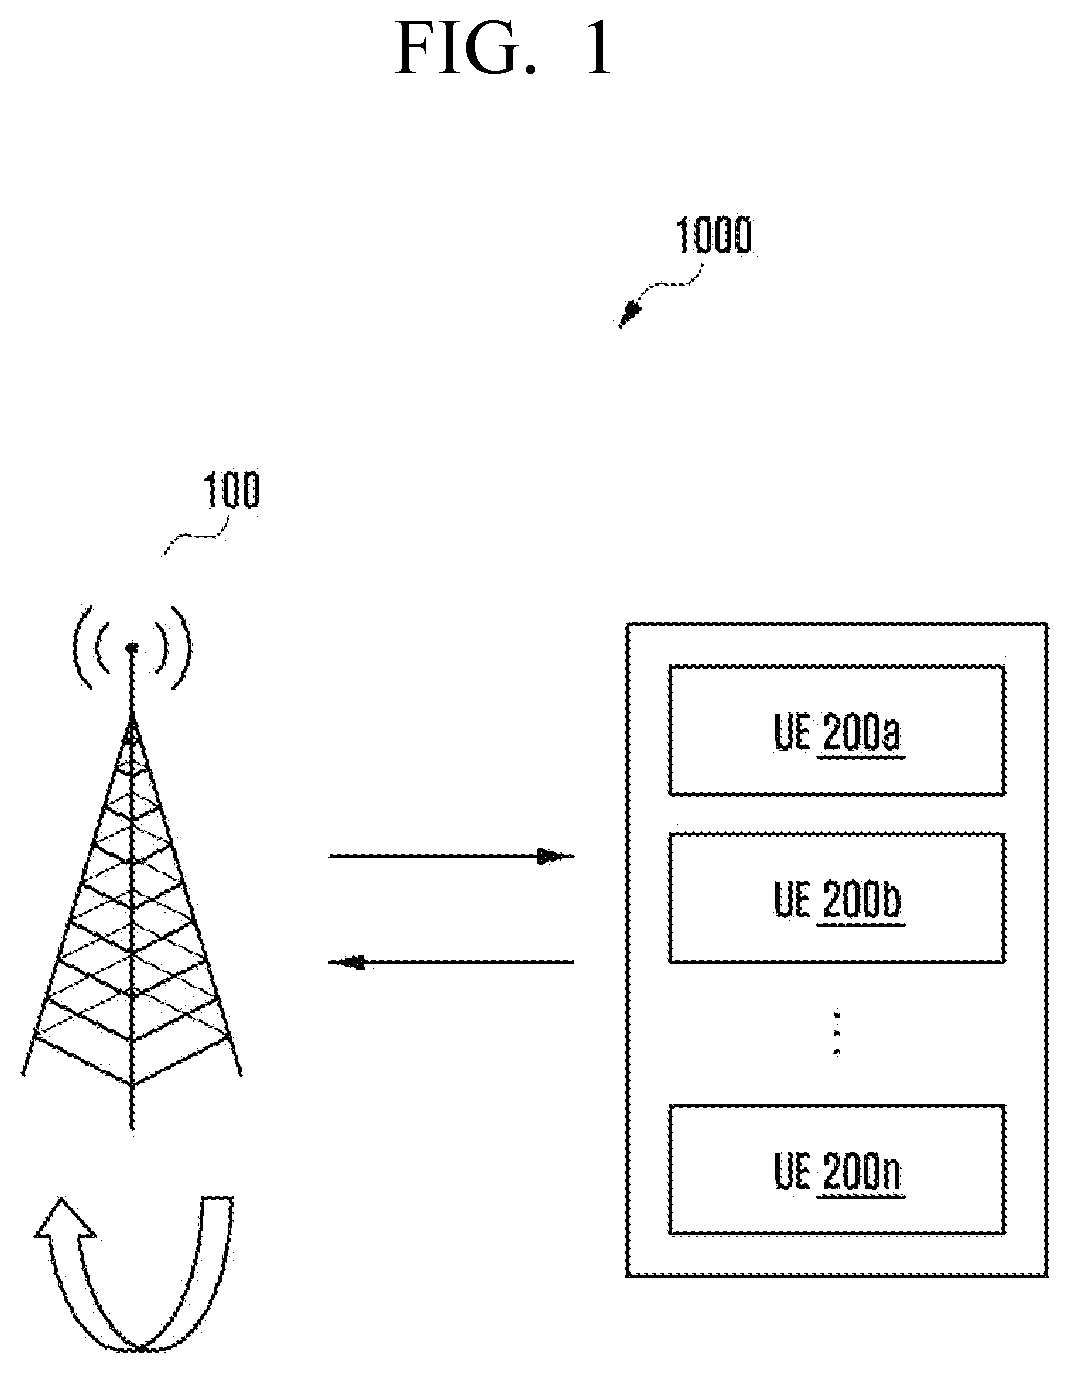 Bandwidth part configurations for single carrier wideband operations